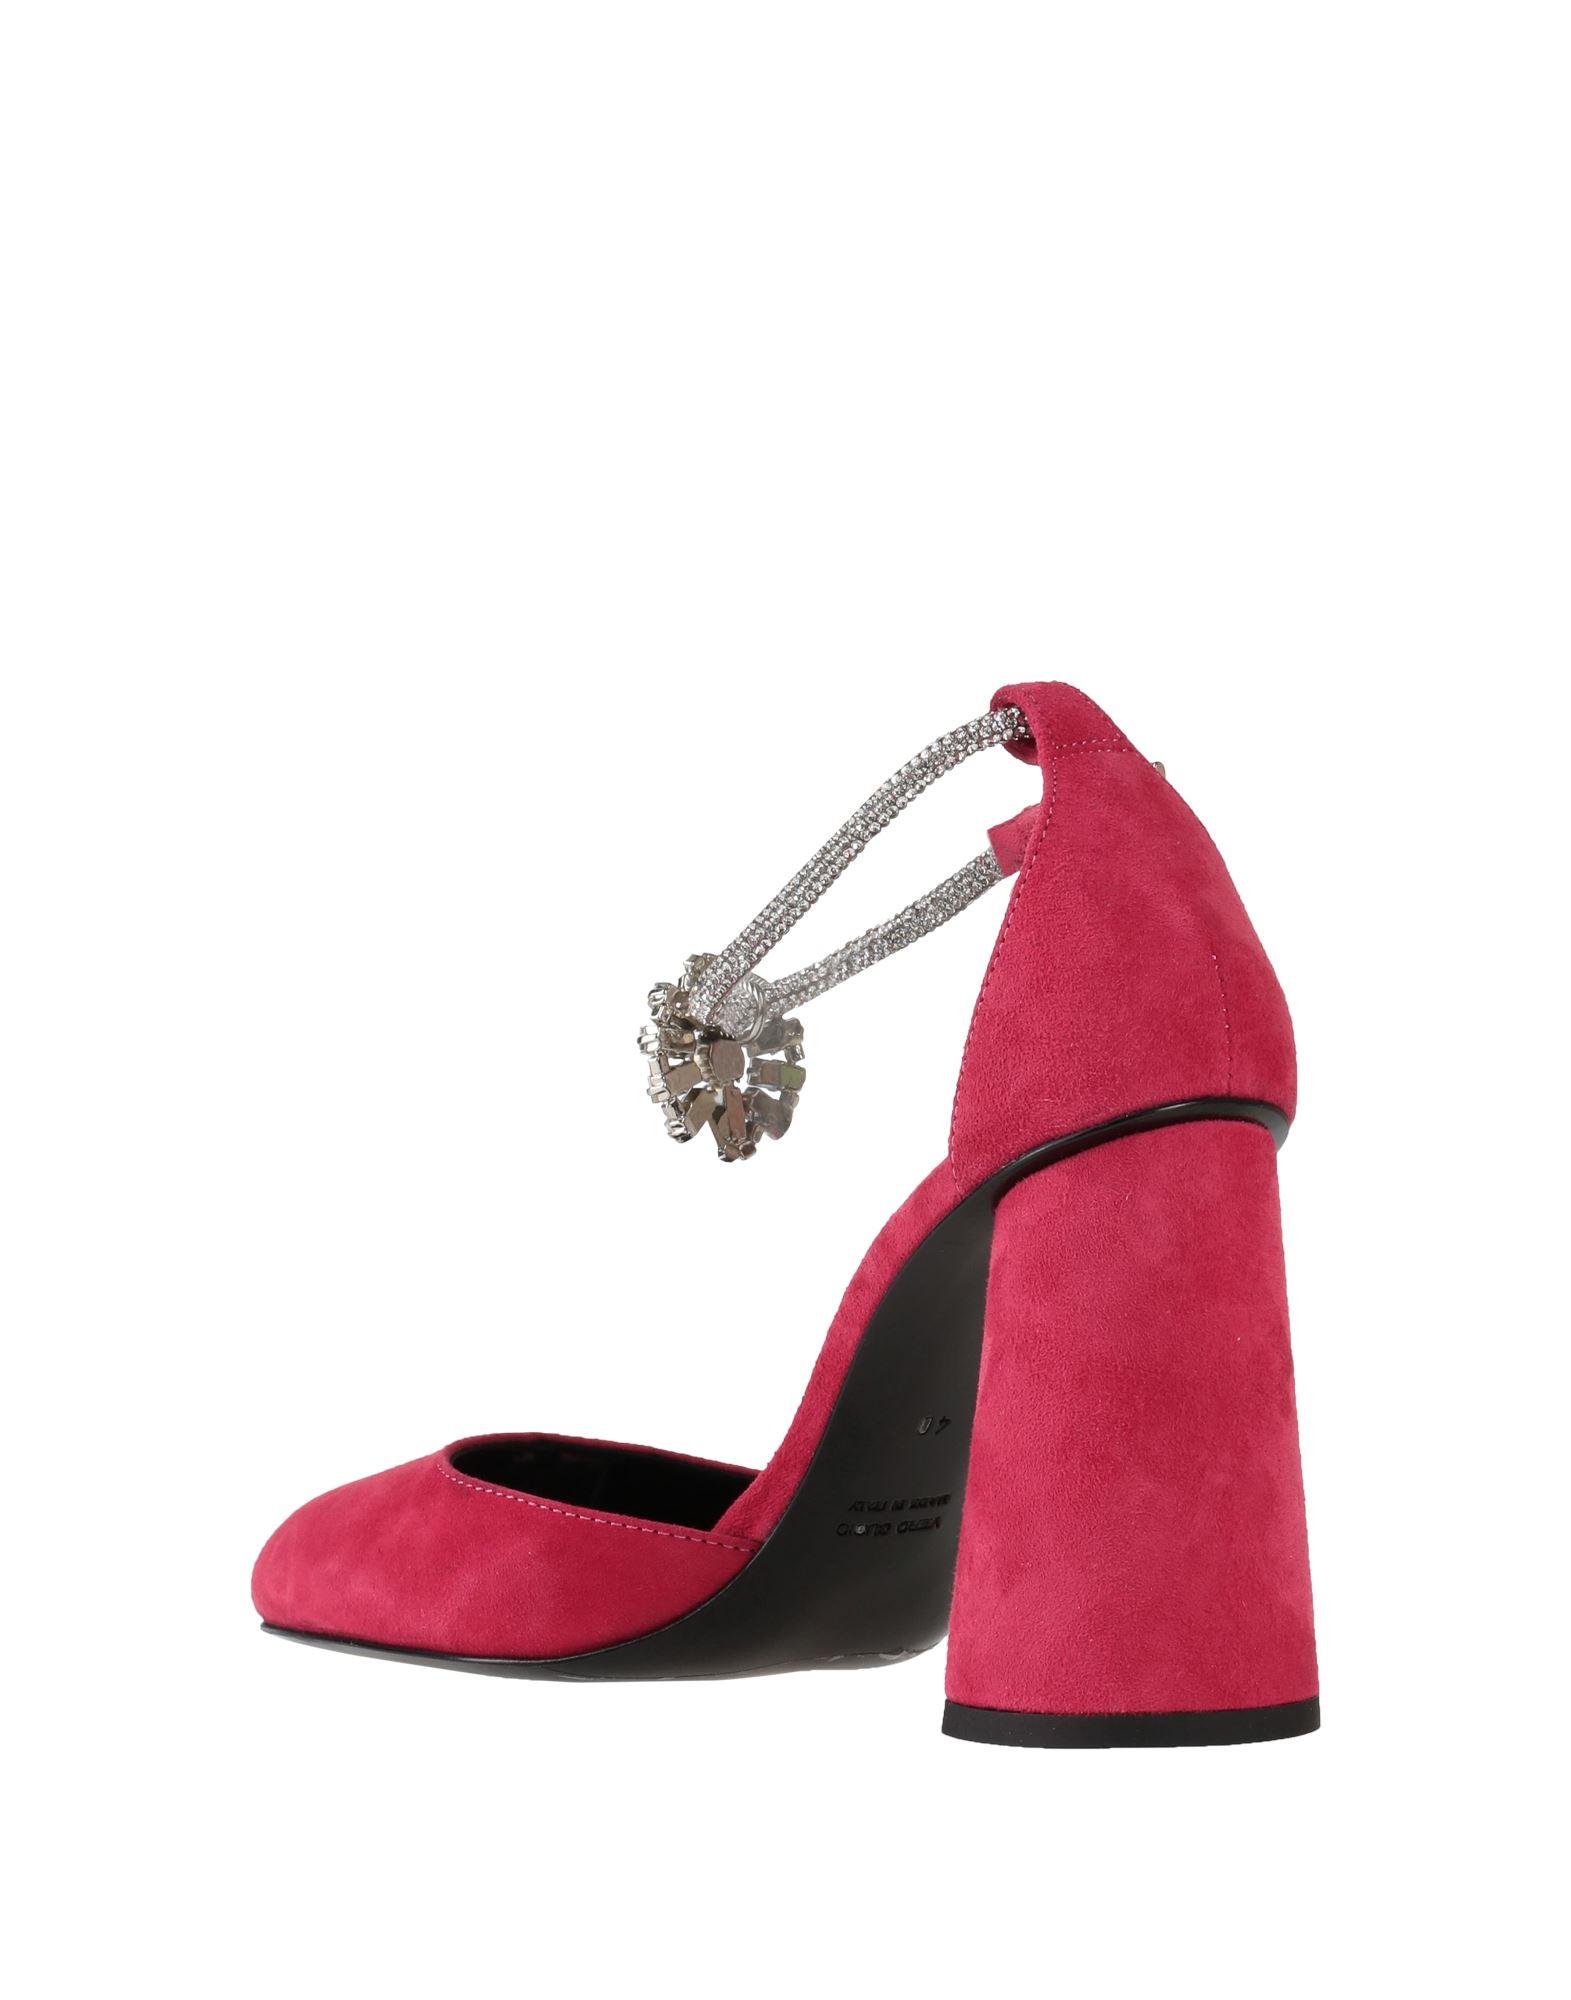 Circus Hotel Pumps in Pink | Lyst